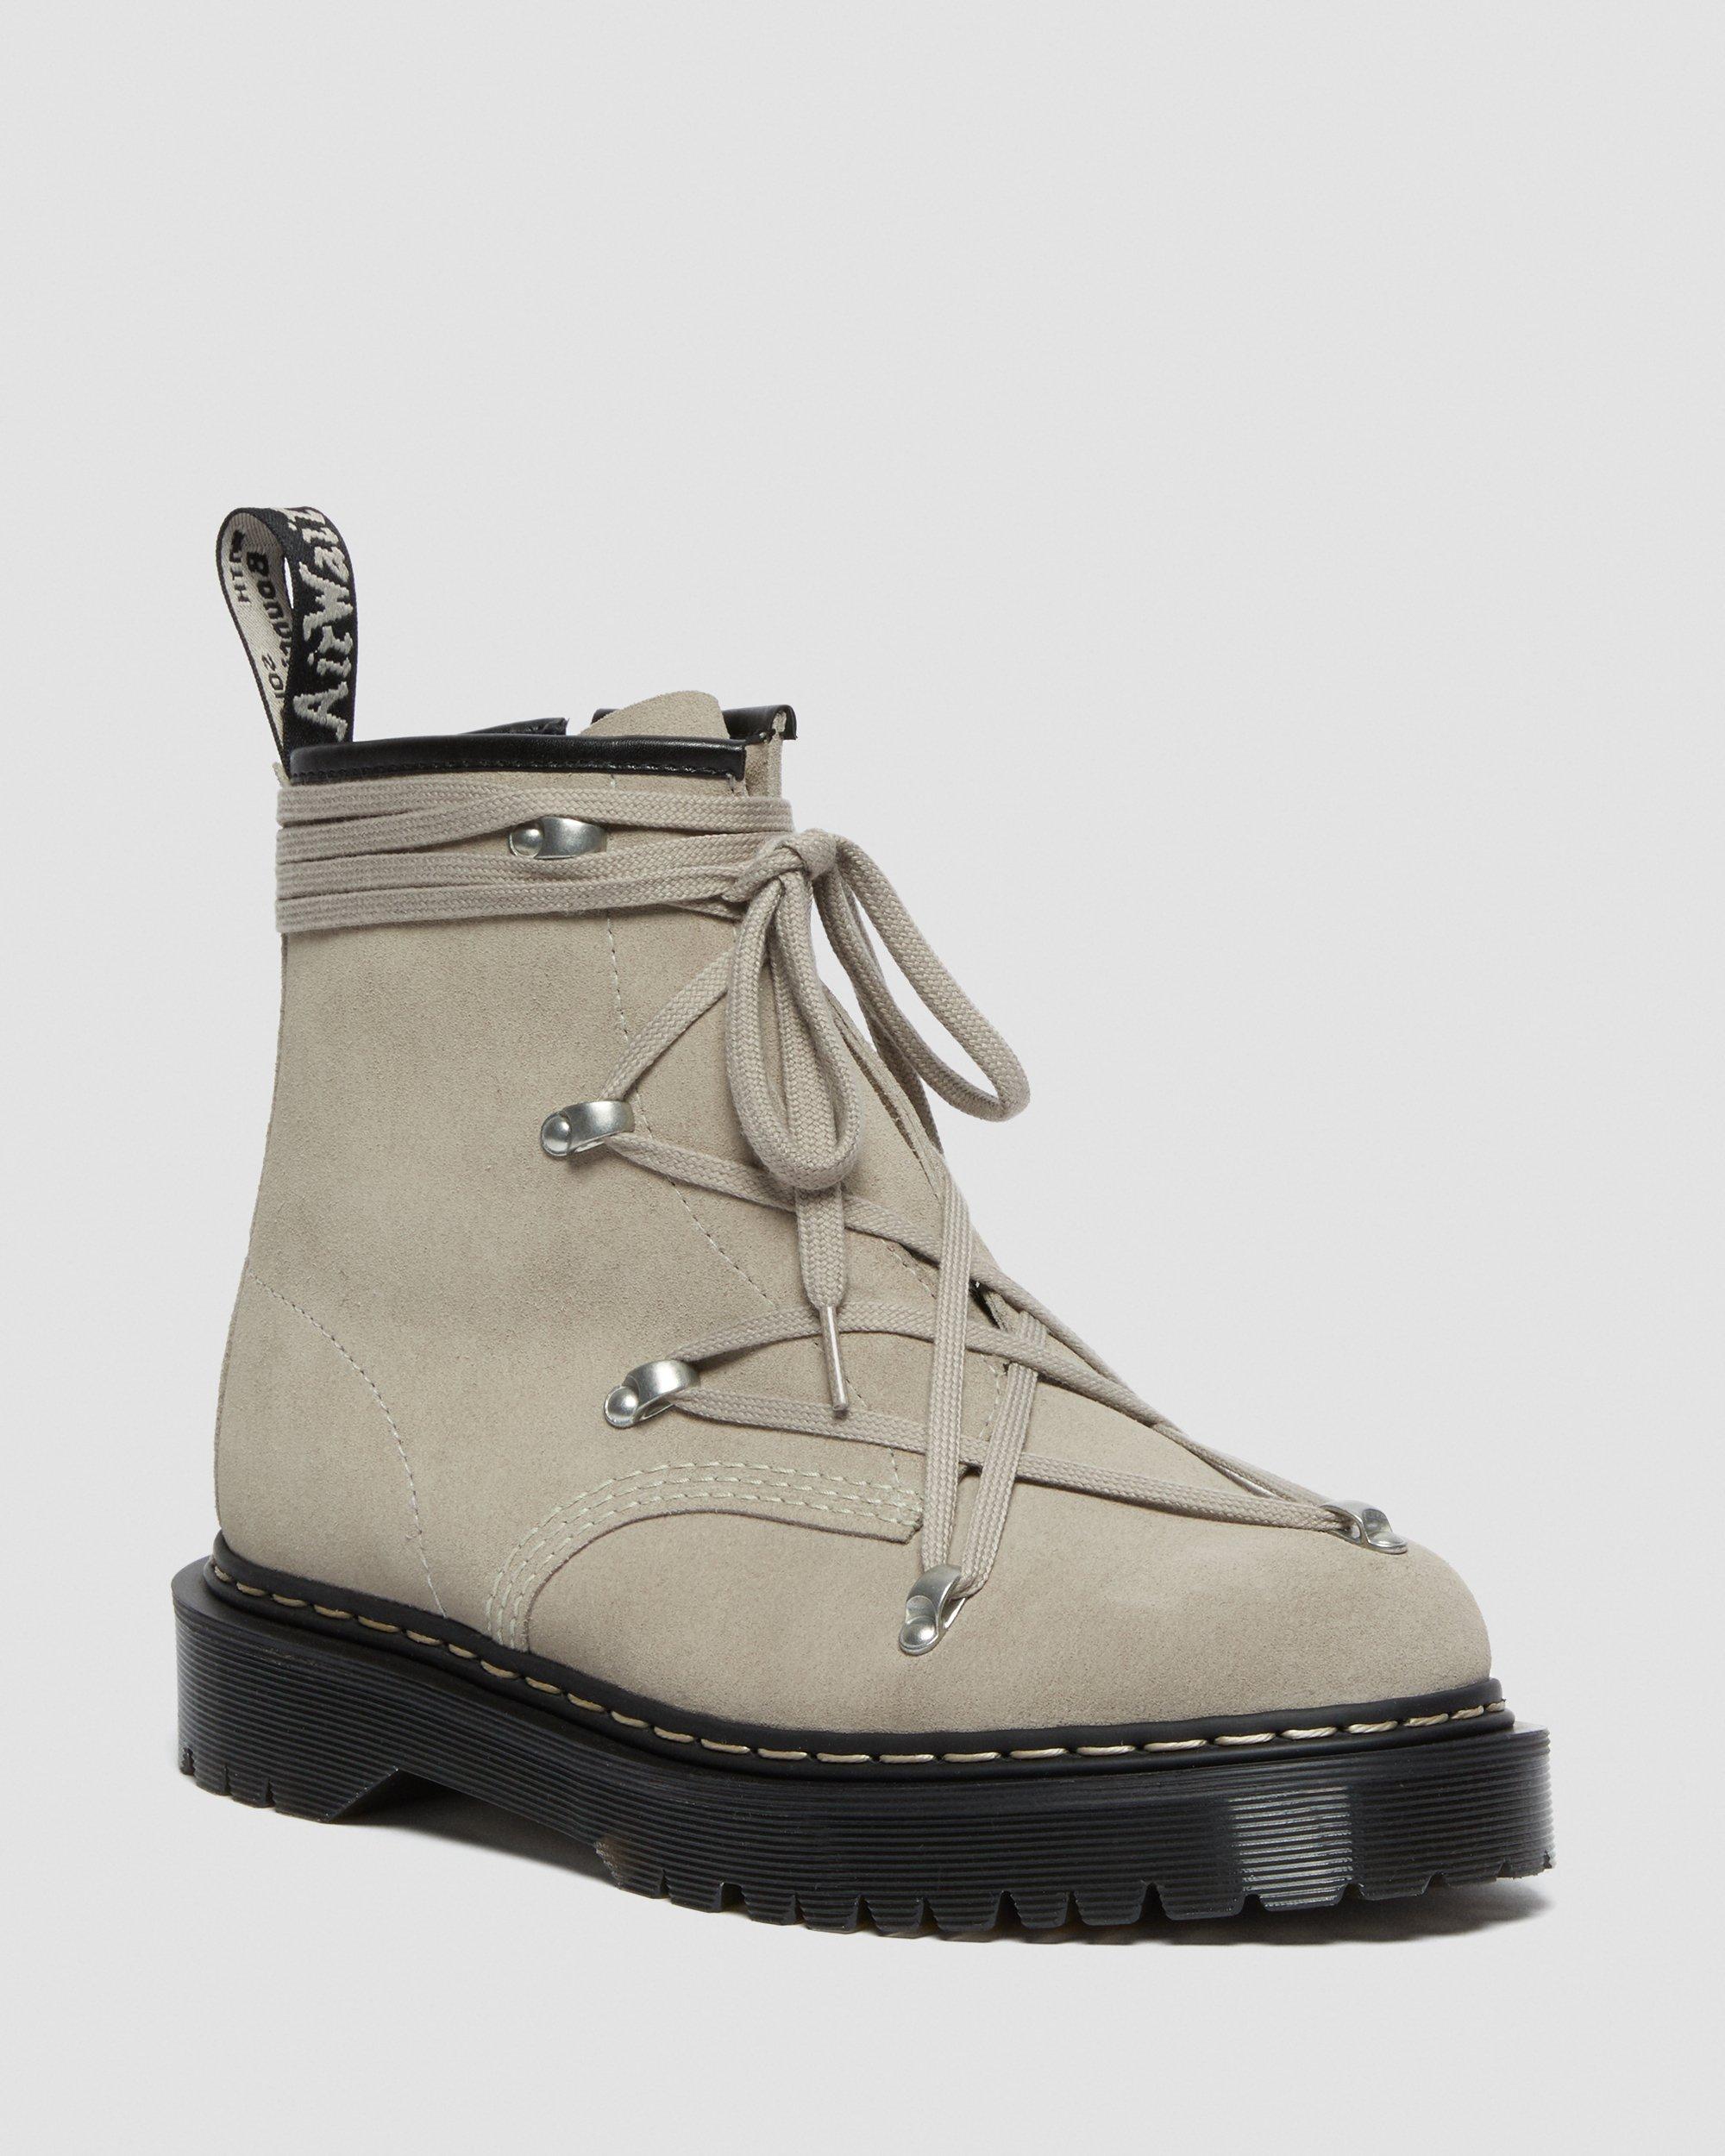 1460 Bex Rick Owens Boots in Light Taupe | Dr. Martens